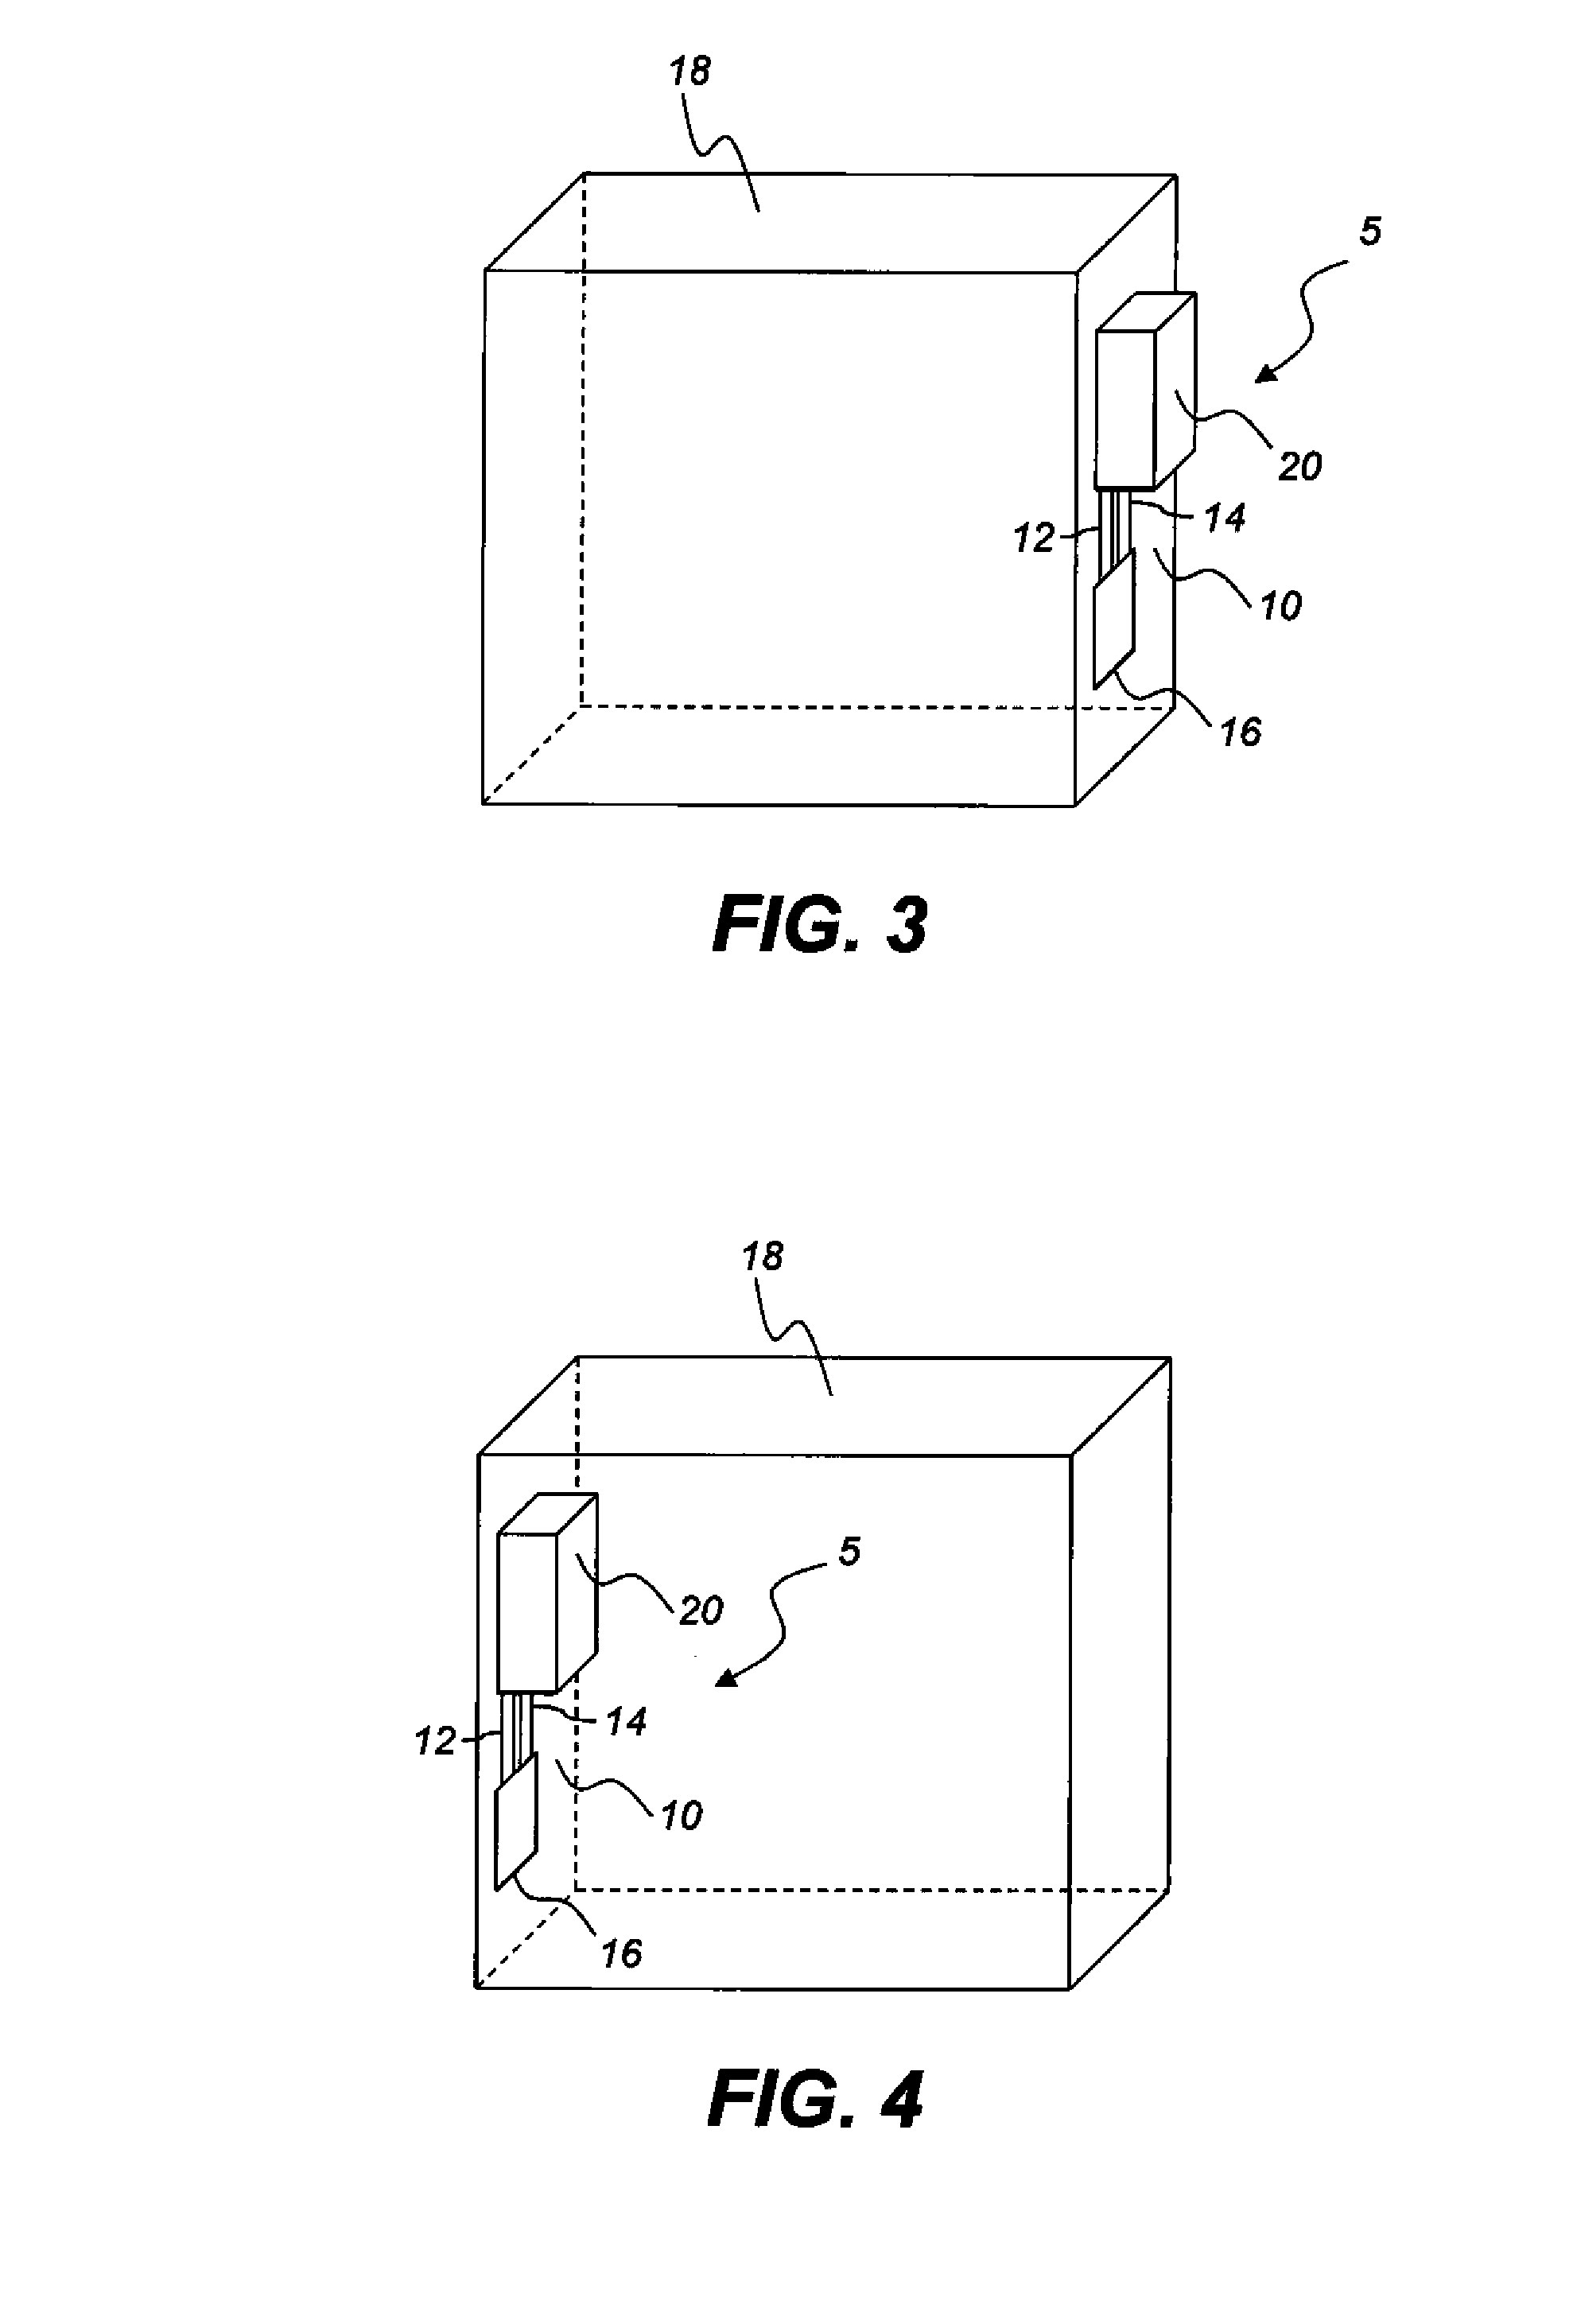 Altering conductor in electronic storage system